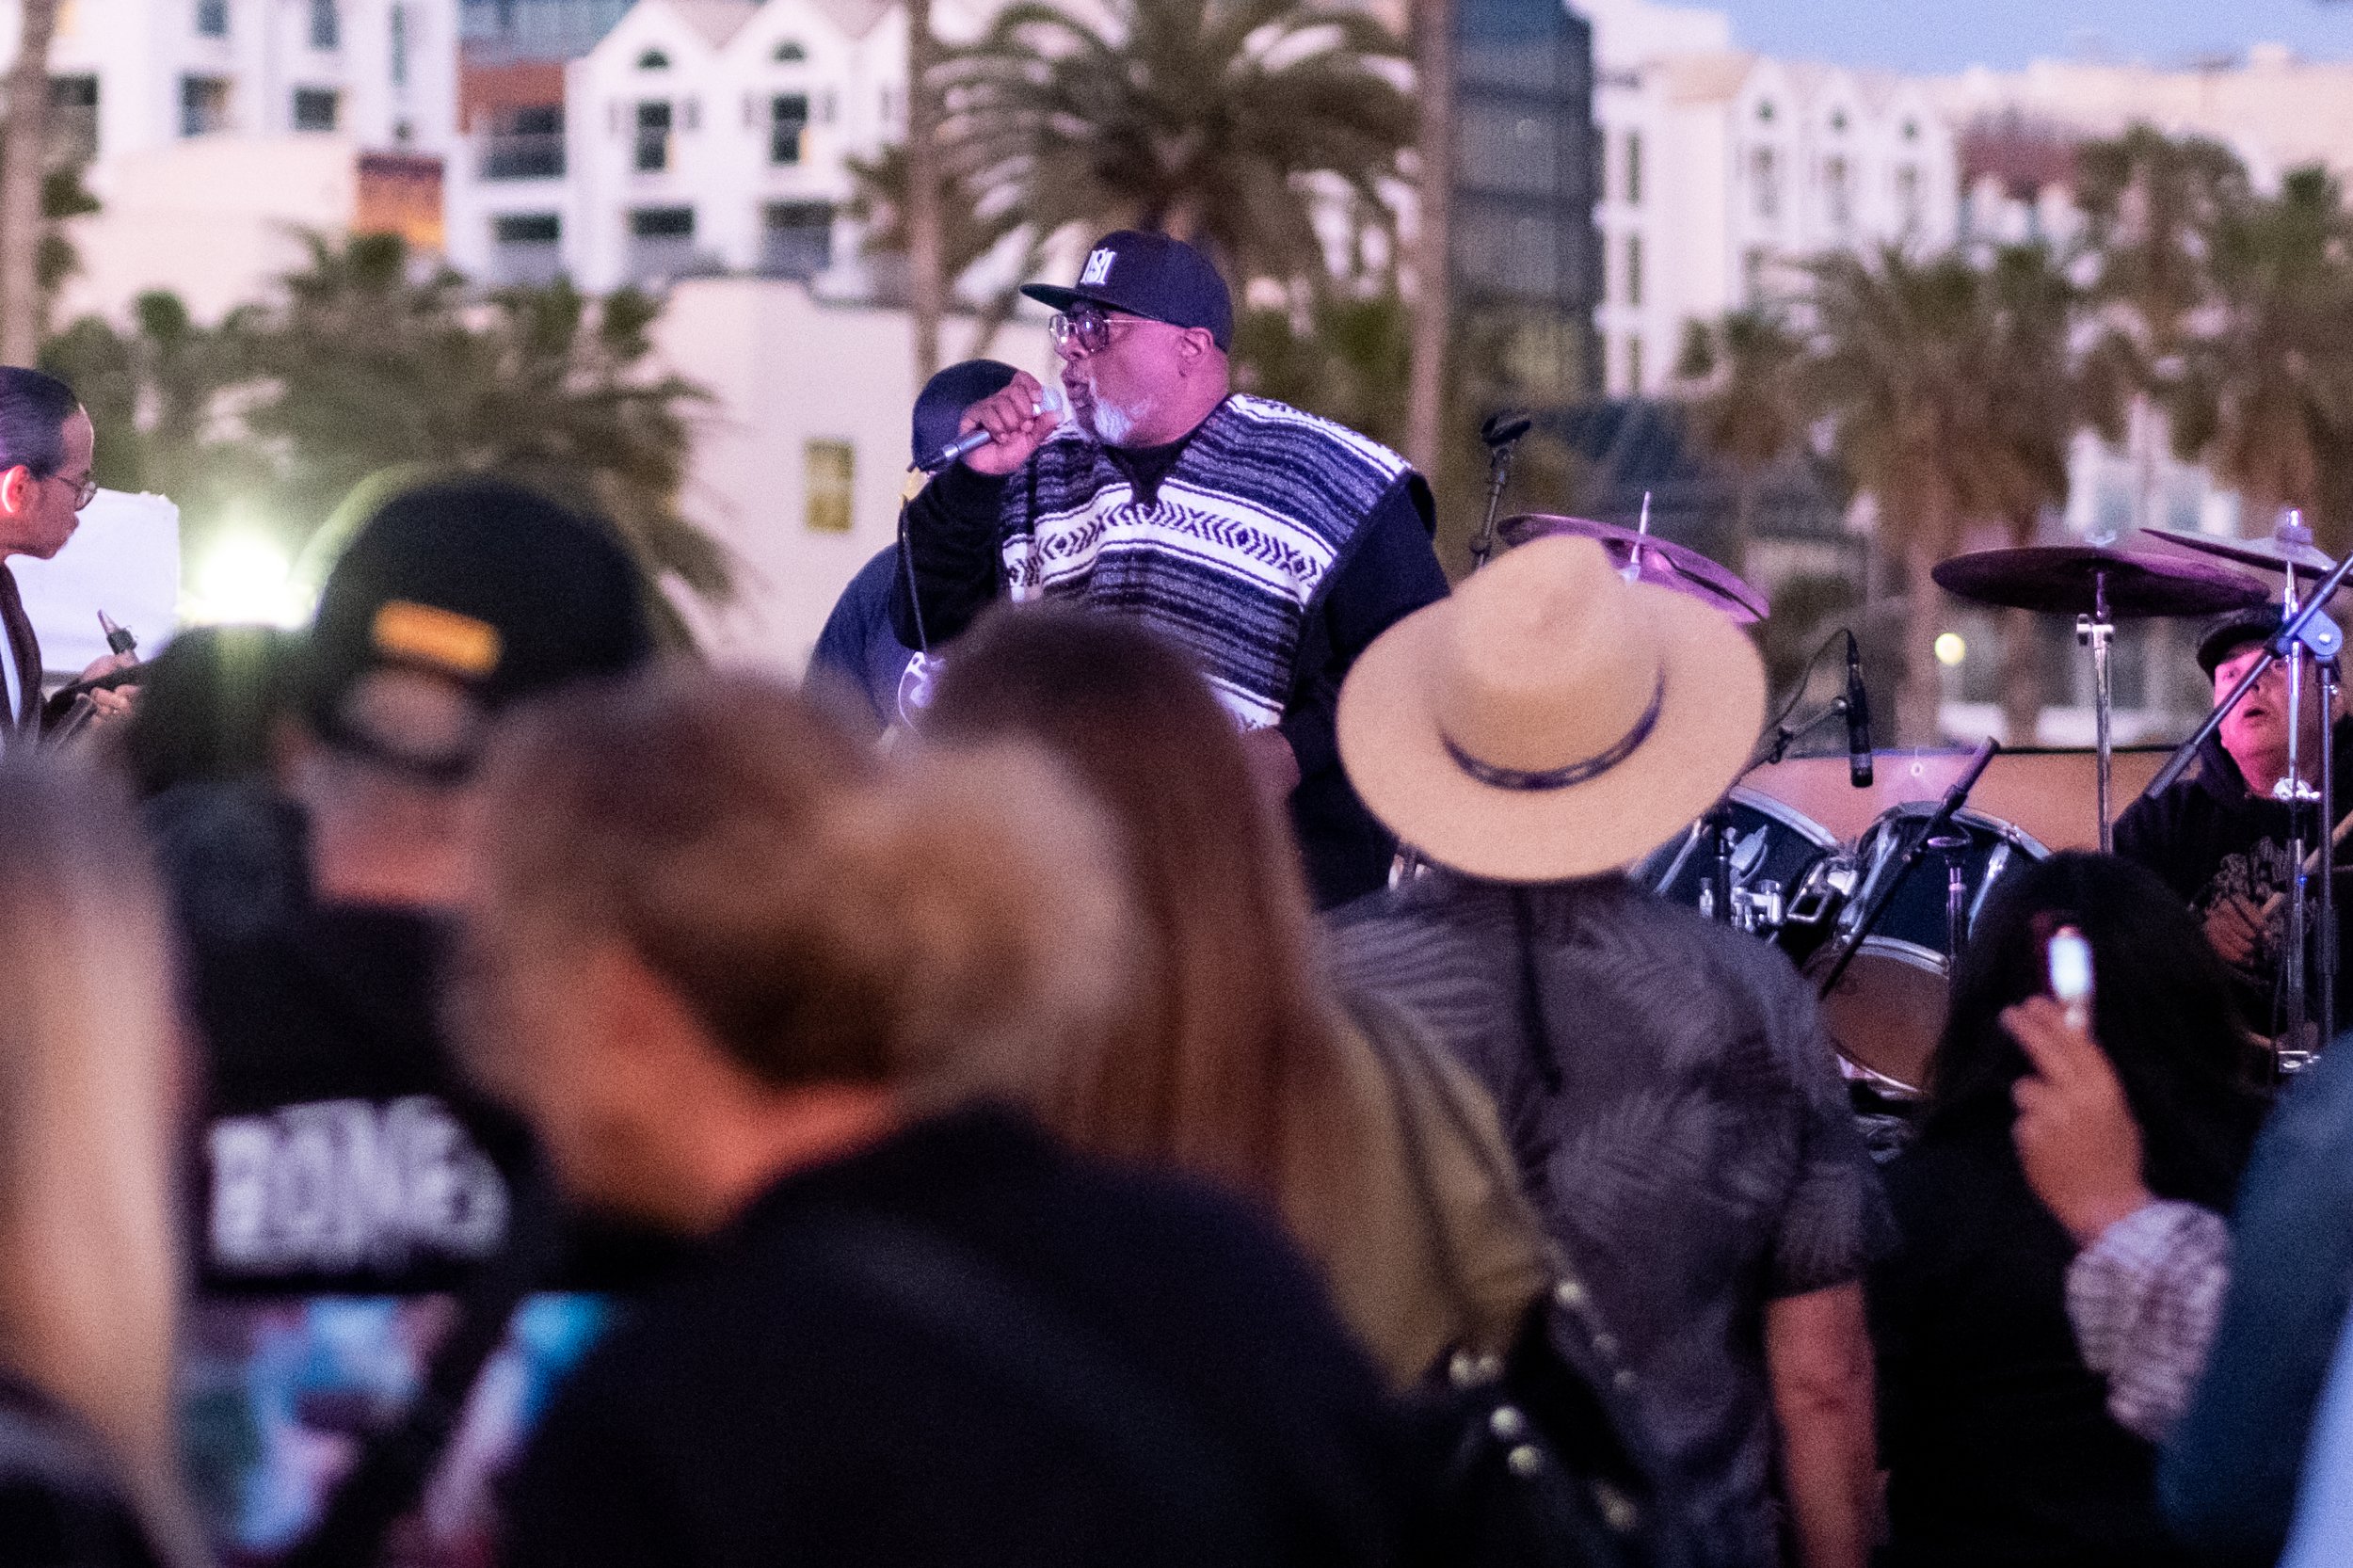  Lead singer of the Horny Toads on the mic at Locals' Night on the Santa Monica Pier on Thursday, April 20, 2023 on the parking deck in Santa Monica, Calif. The pier hosts Locals' Night every third Thursday with free programming from 4:00pm to 10:00p